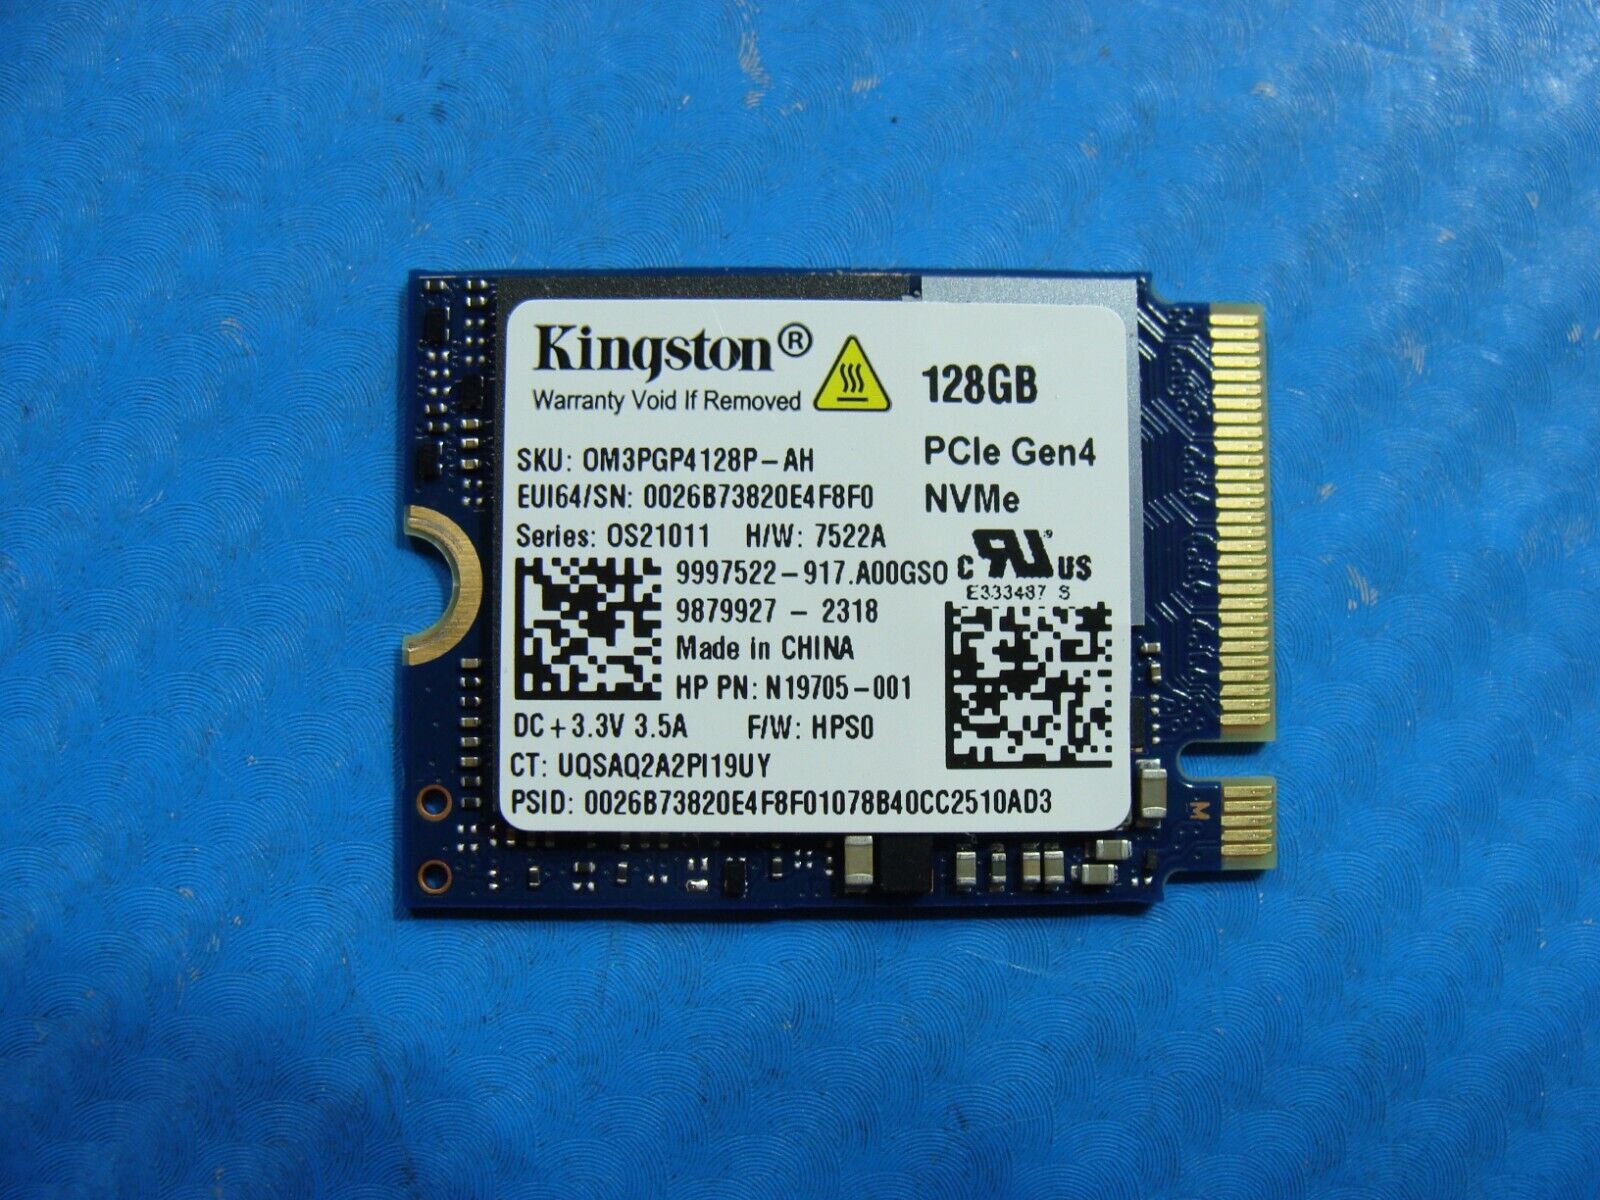 HP 22-dd0143w Kingston 128GB NVMe M.2 SSD Solid State Drive OM3PGP4128P-AH